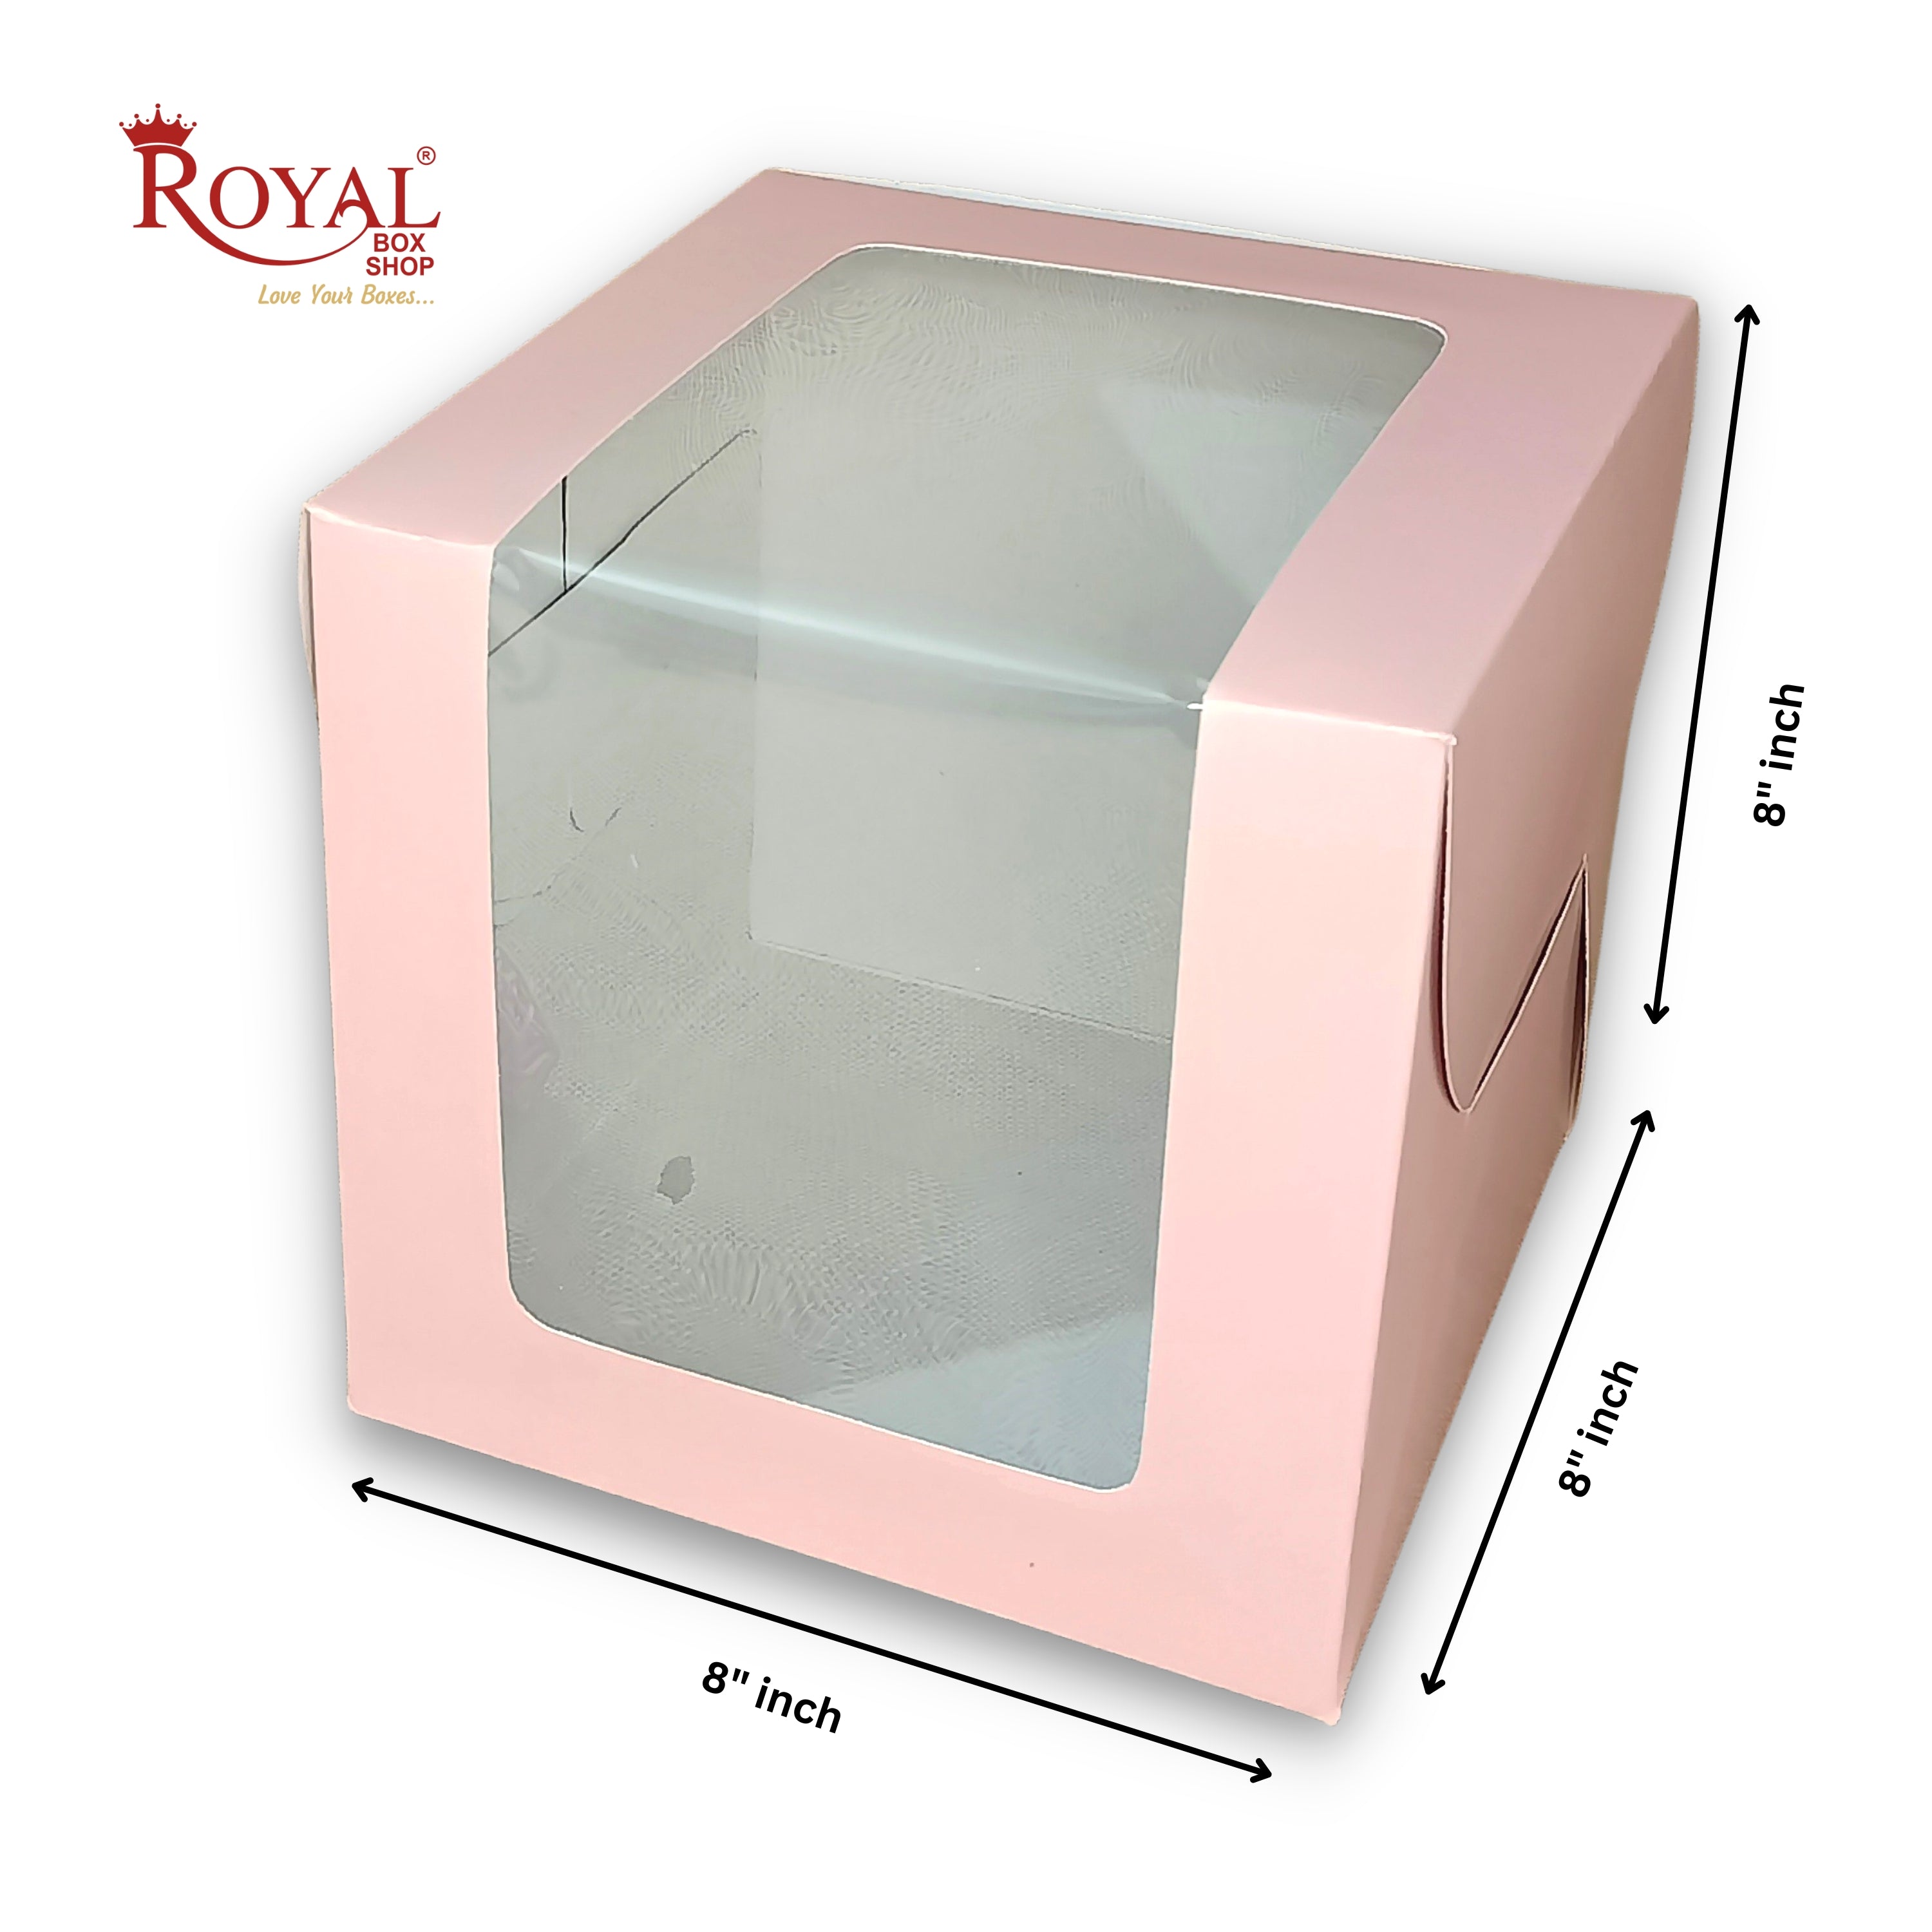 Ghoomar Collection: Tall Cake Box for half kg-8x8x7